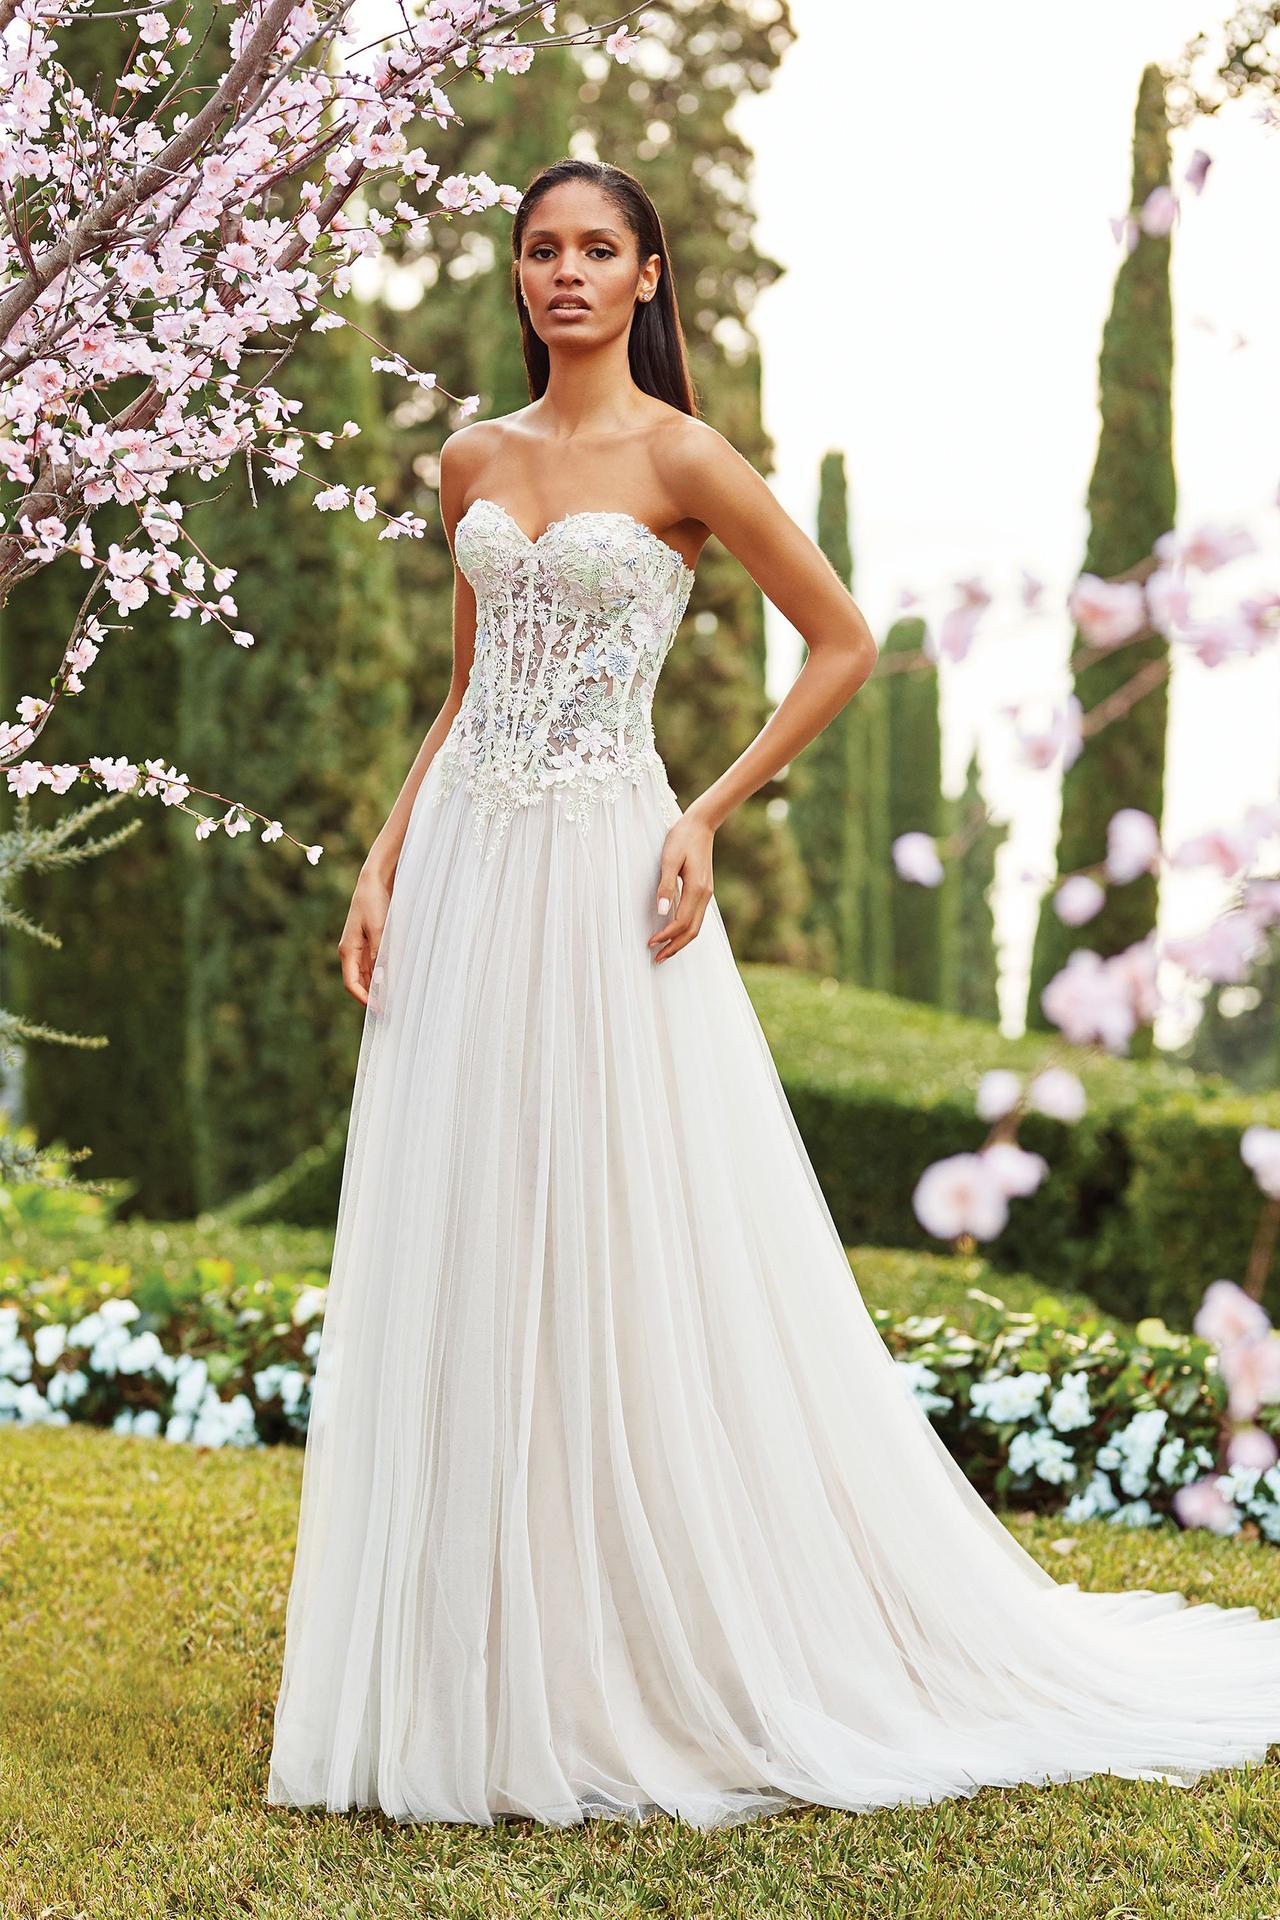 10 Stunning Bridal Gown Designs 2023  Save It Right Away  SetMyWed